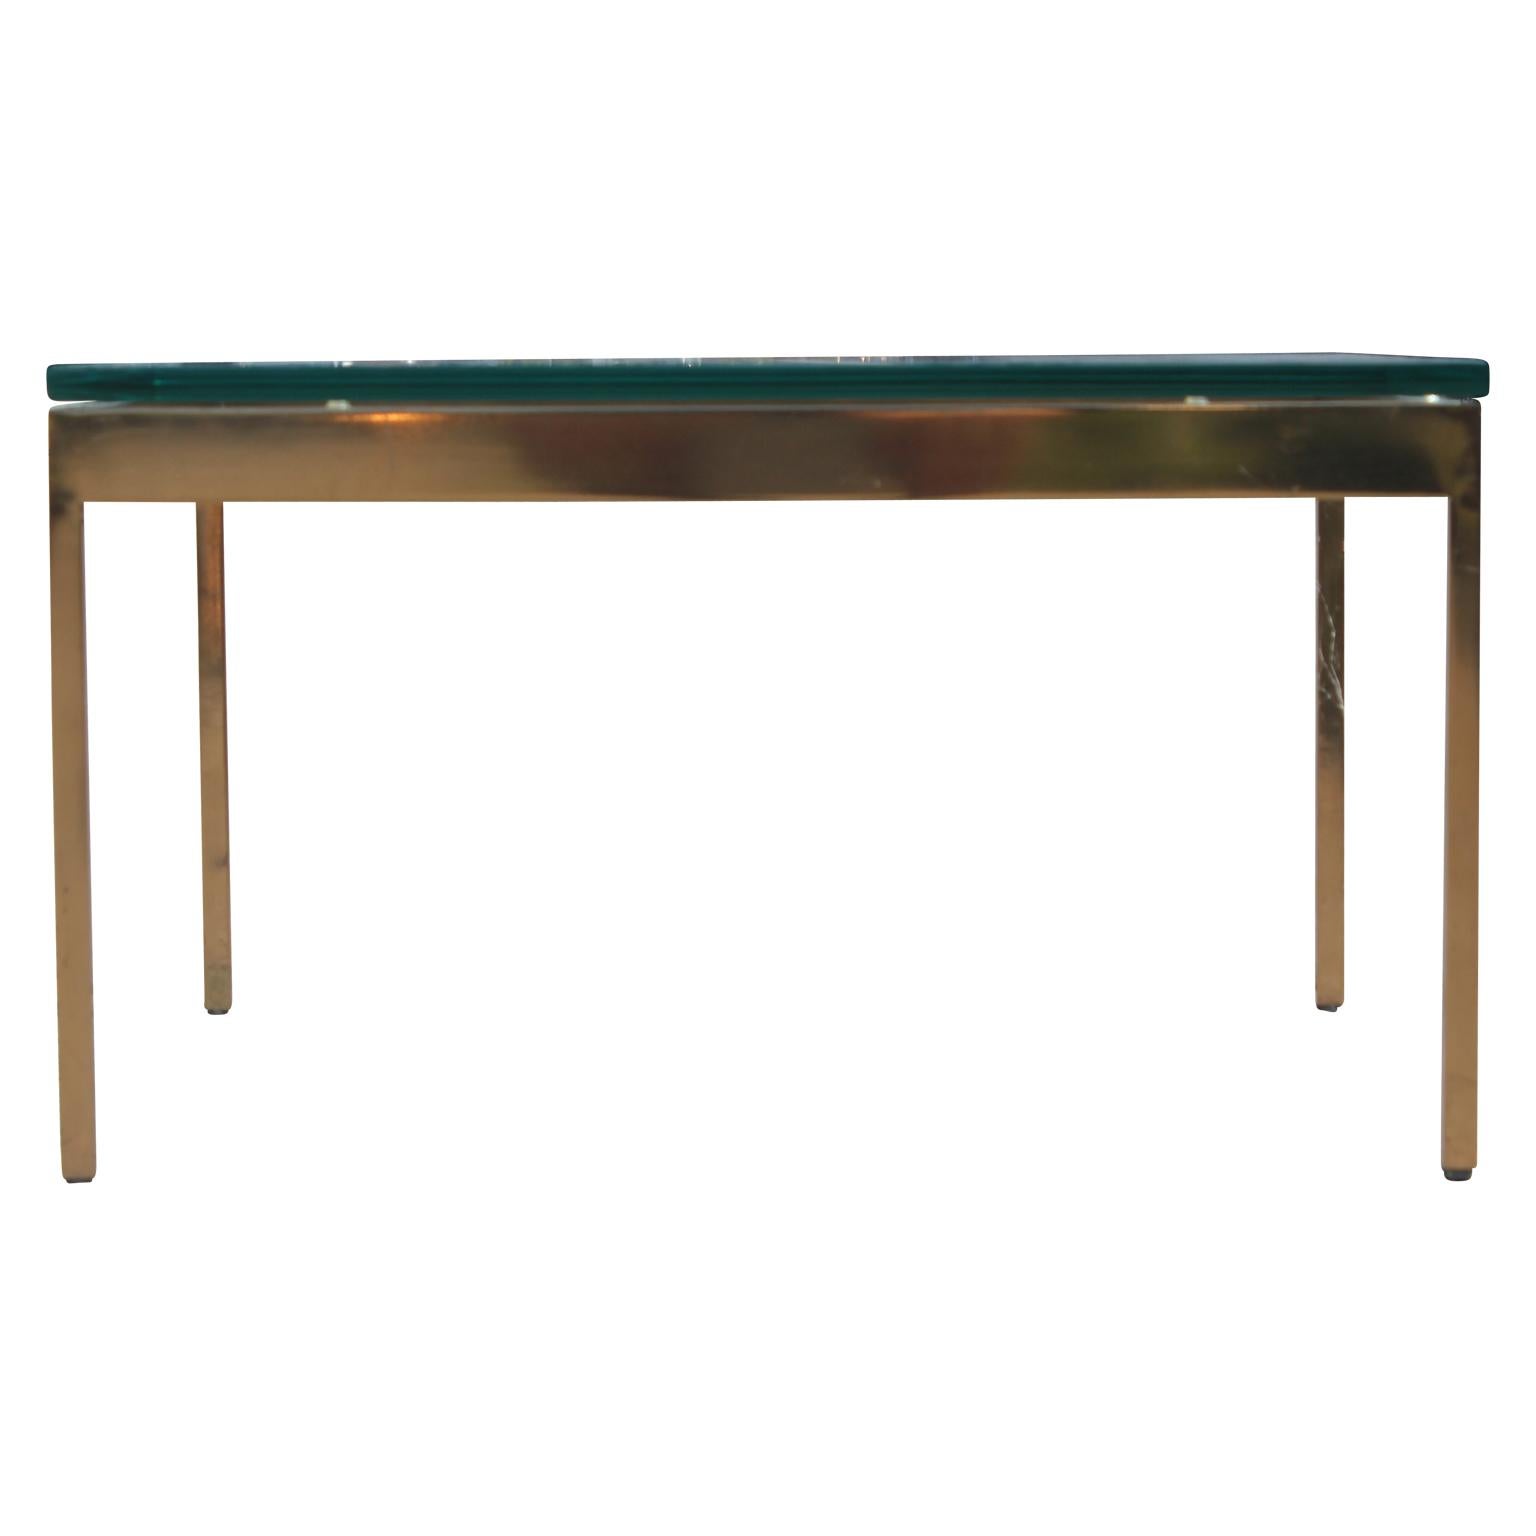 Gorgeous Hollywood Regency style solid brass and glass square coffee table by Knoll & Nicos Zographos.